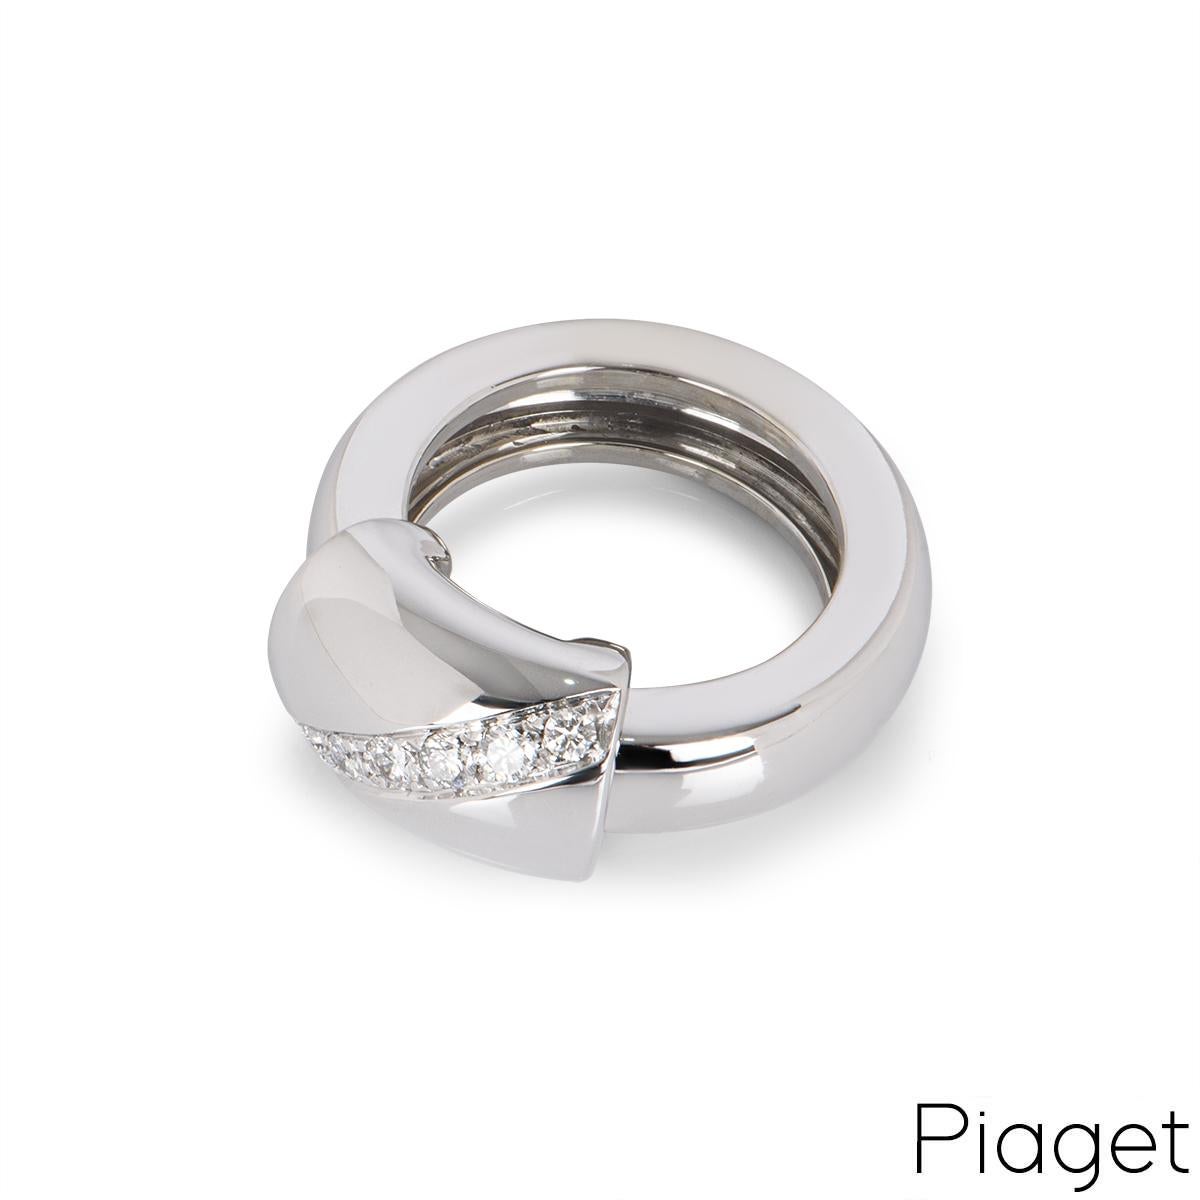 Piaget White Gold Diamond Dancer Ring In Excellent Condition For Sale In London, GB